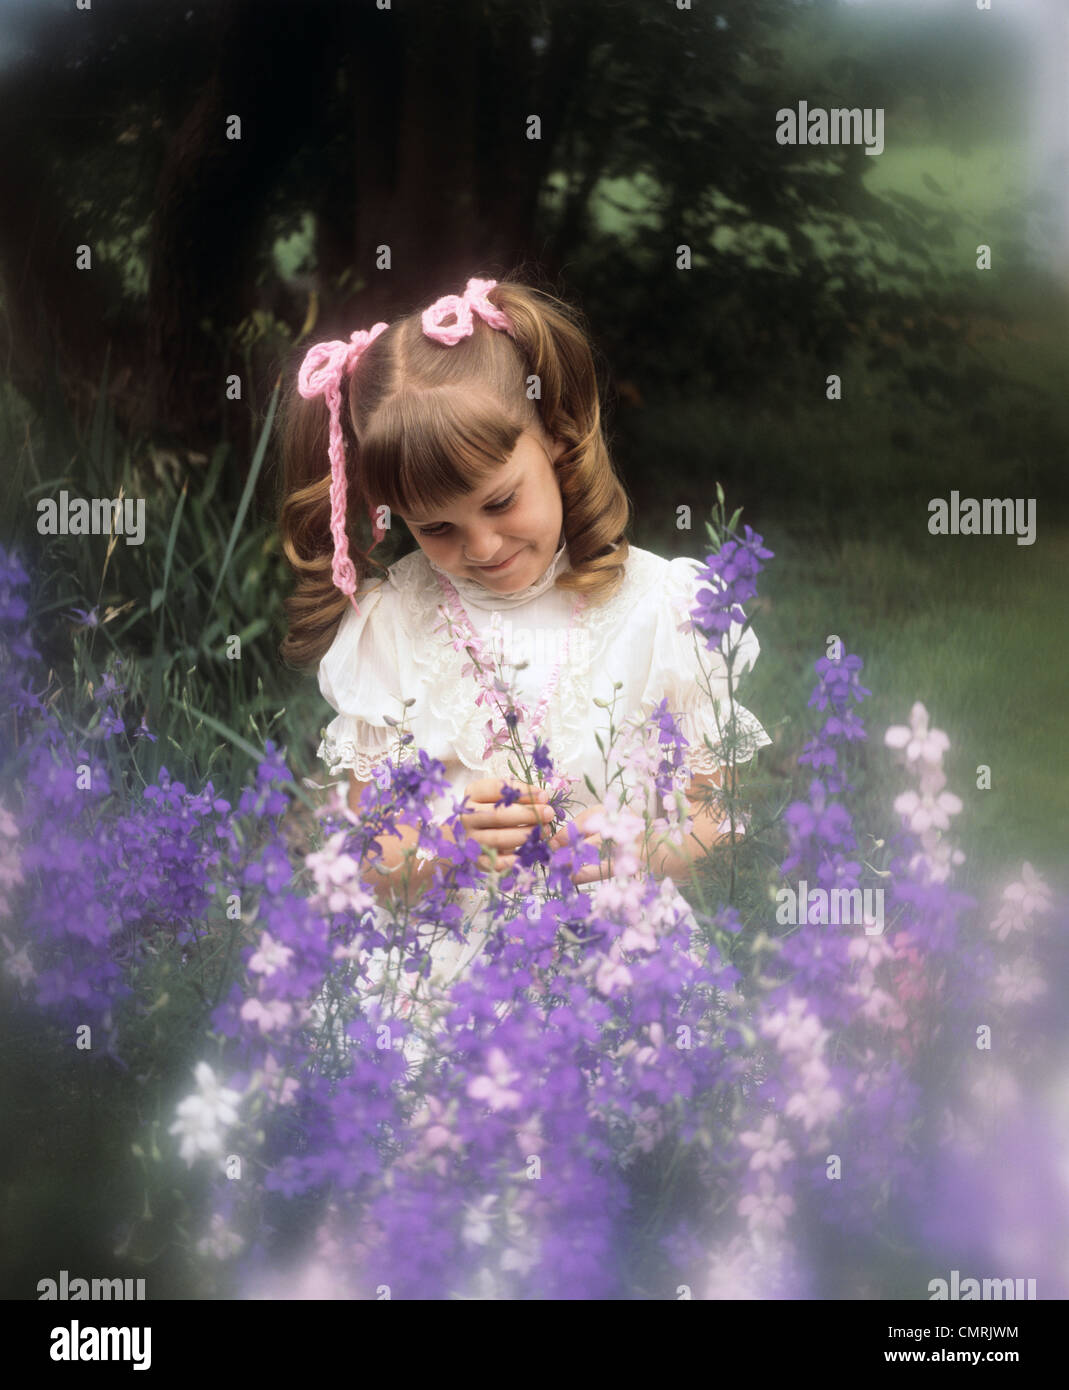 1970s SMILING LITTLE GIRL IN WHITE DRESS PINK HAIR RIBBONS LOOKING AT PURPLE FLOWERS Stock Photo